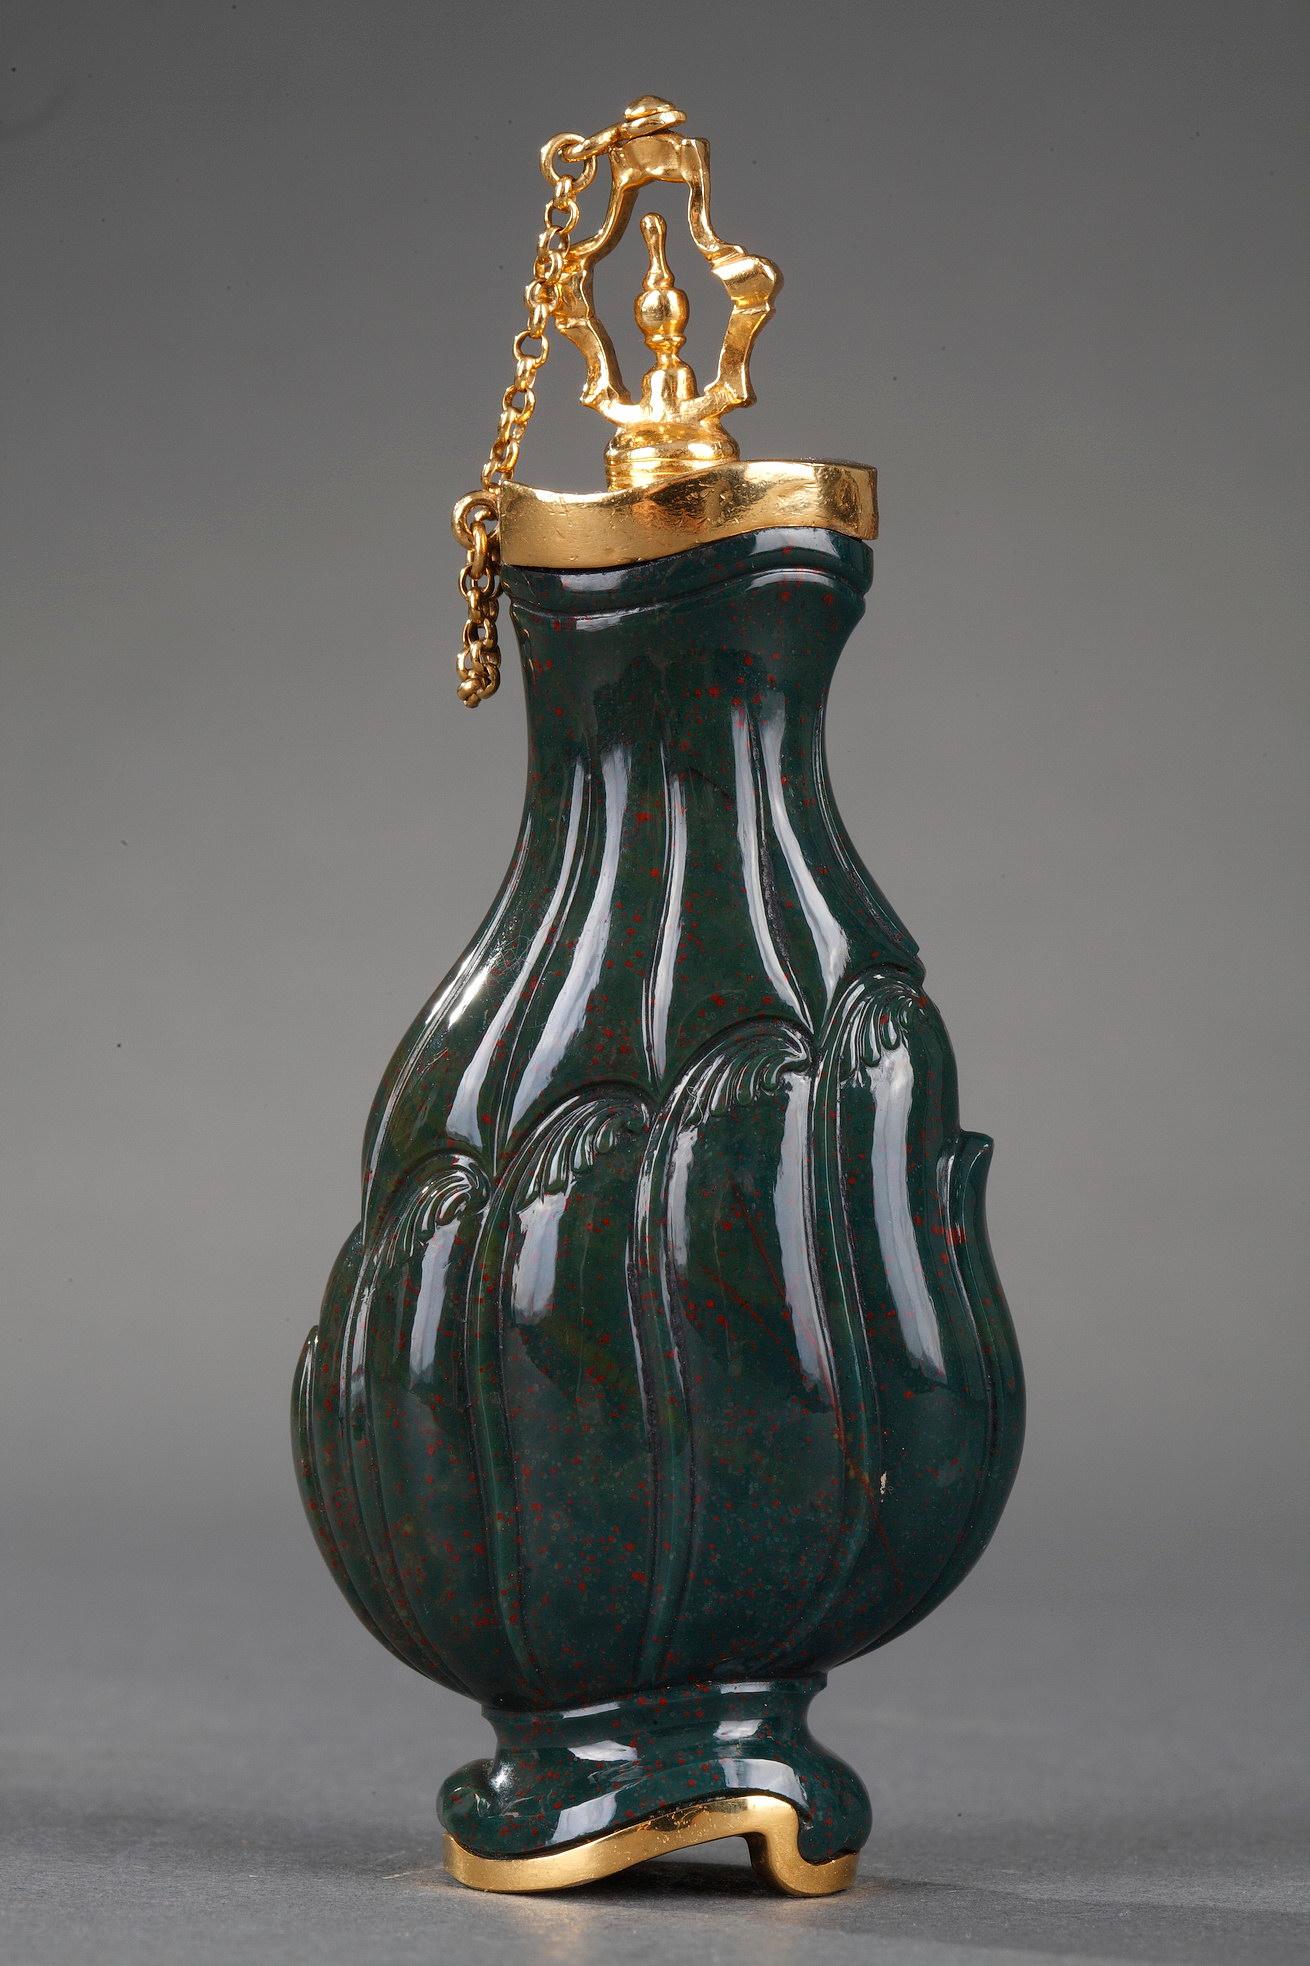 Exceptional pear-shaped flask in heliotrope, also known as bloodstone jasper. The body of the flask intricately sculpted with gadrooning and Rocaille motifs. A band of gold encircles the neck and base of the flask, and the openwork, gold stopper is